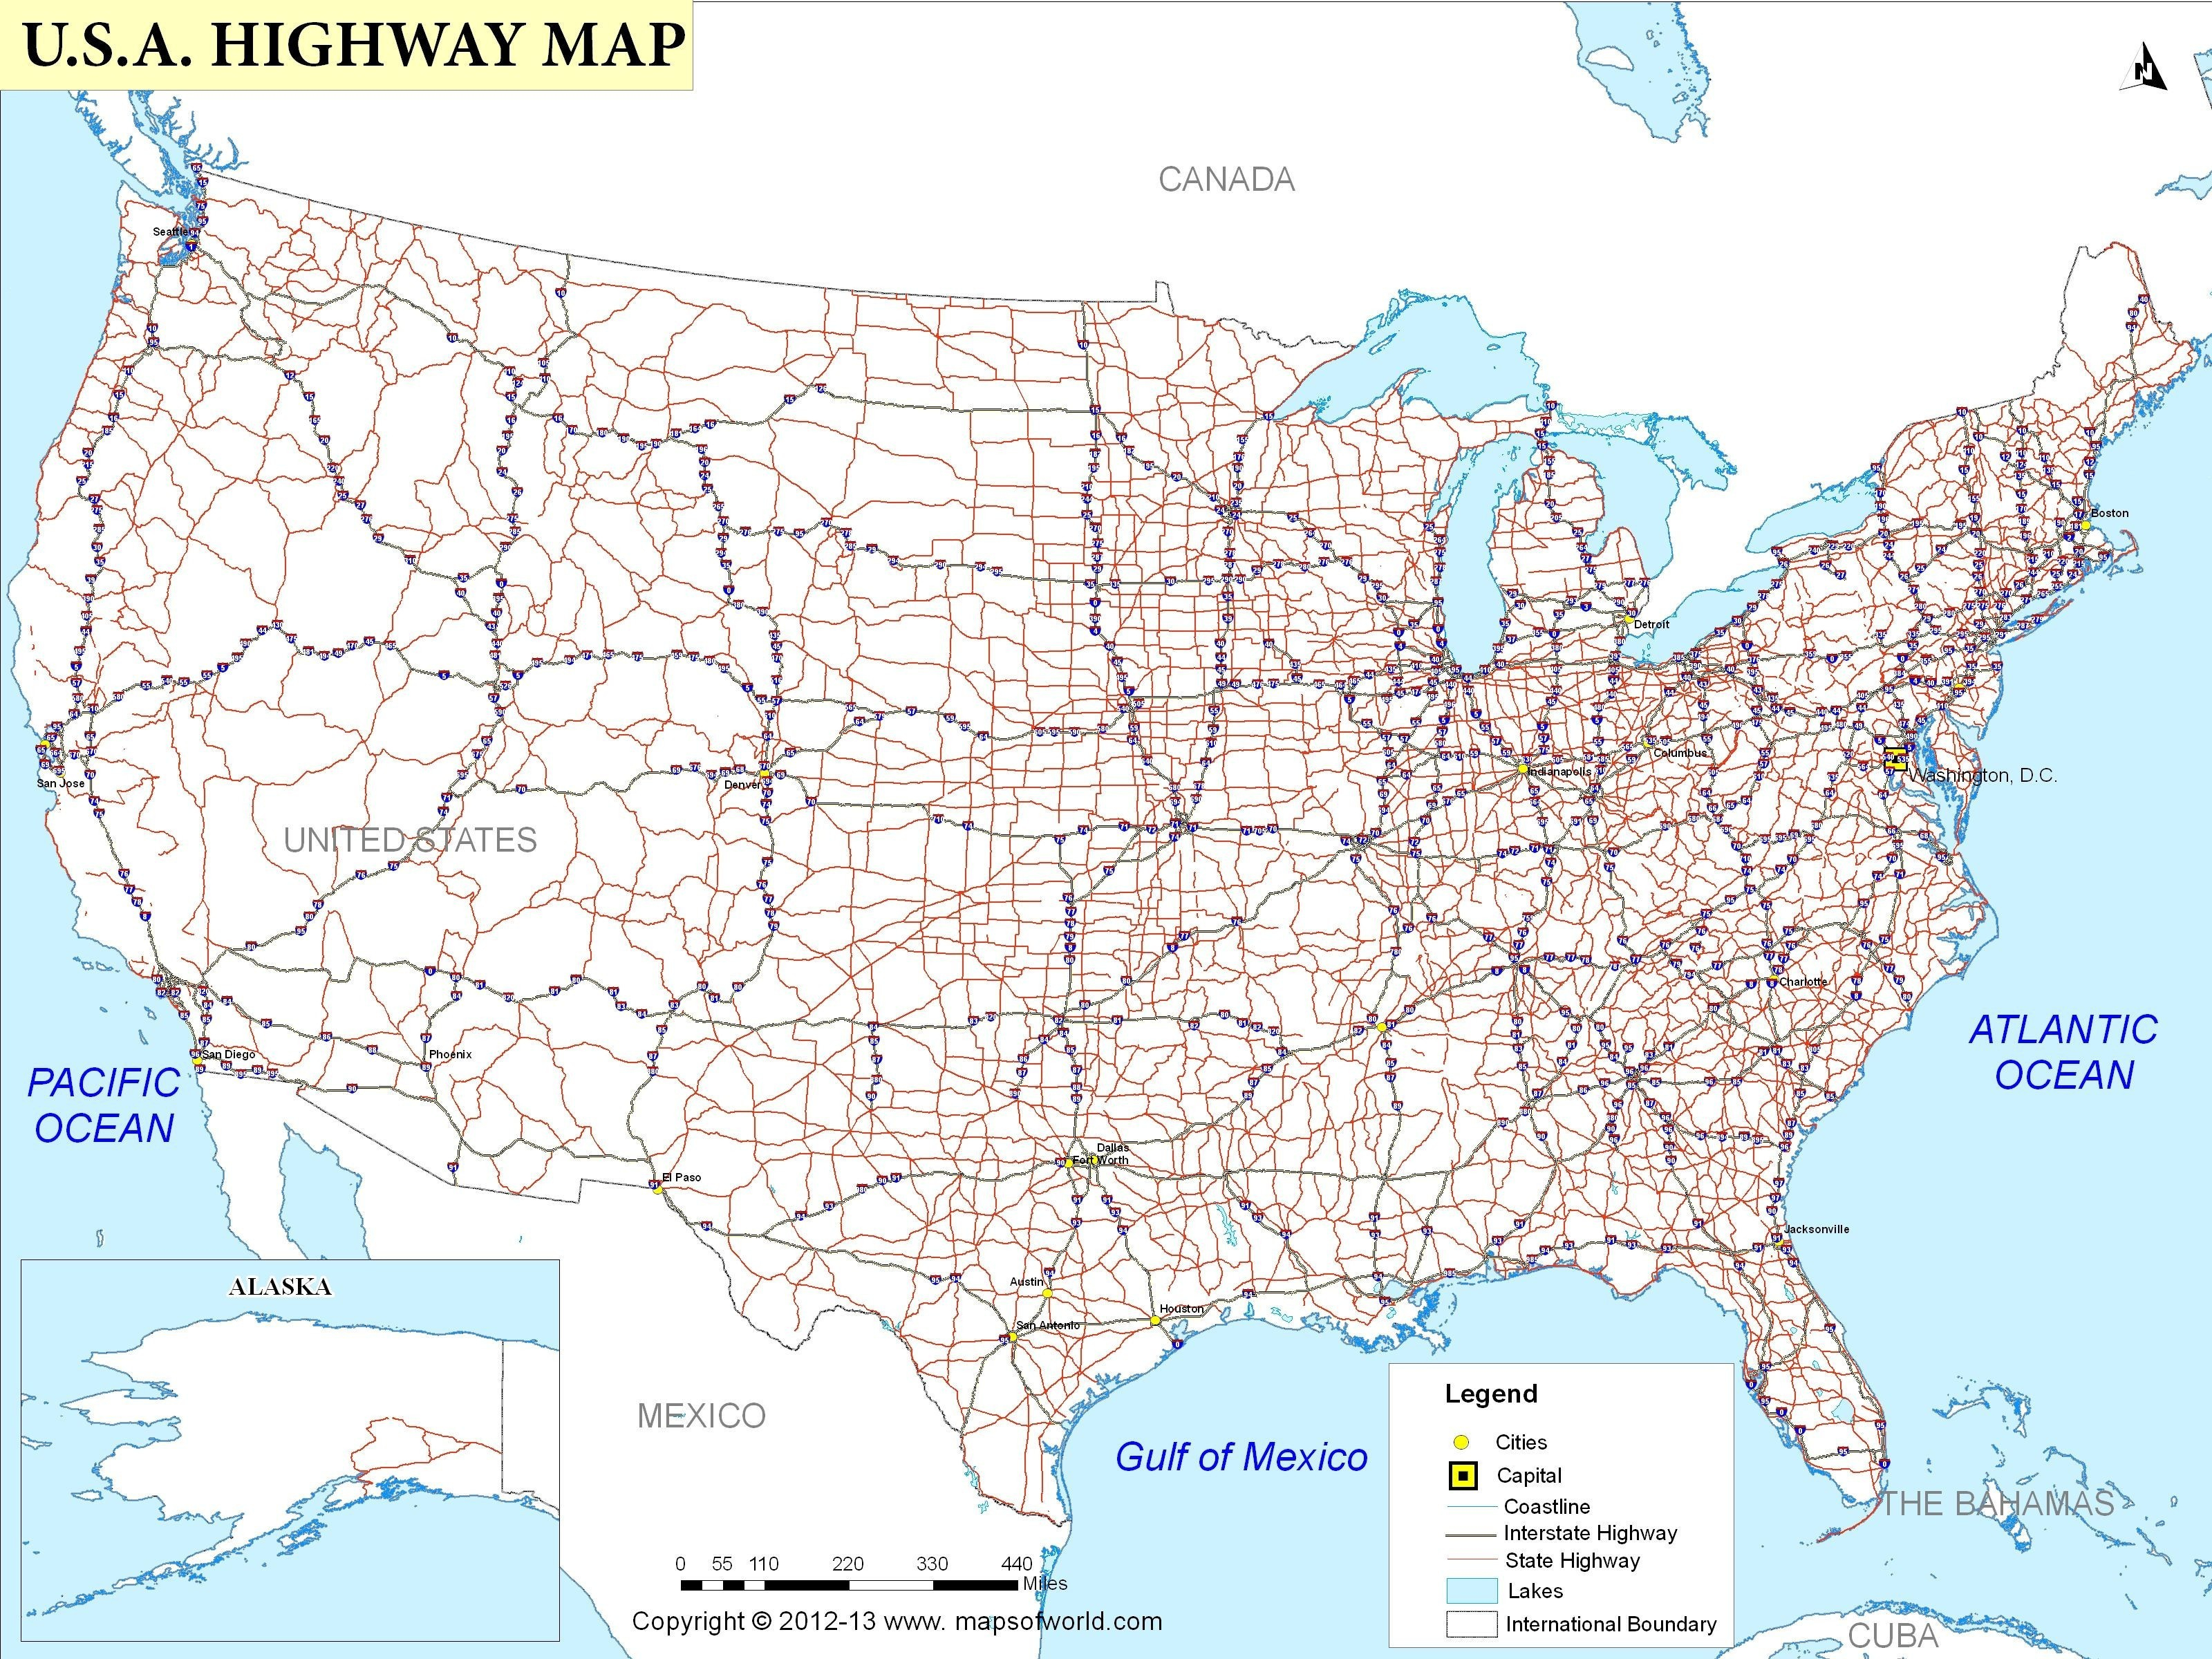 Free Printable Us Highway Map Usa Road Map Luxury United States Road - Printable State Maps With Highways